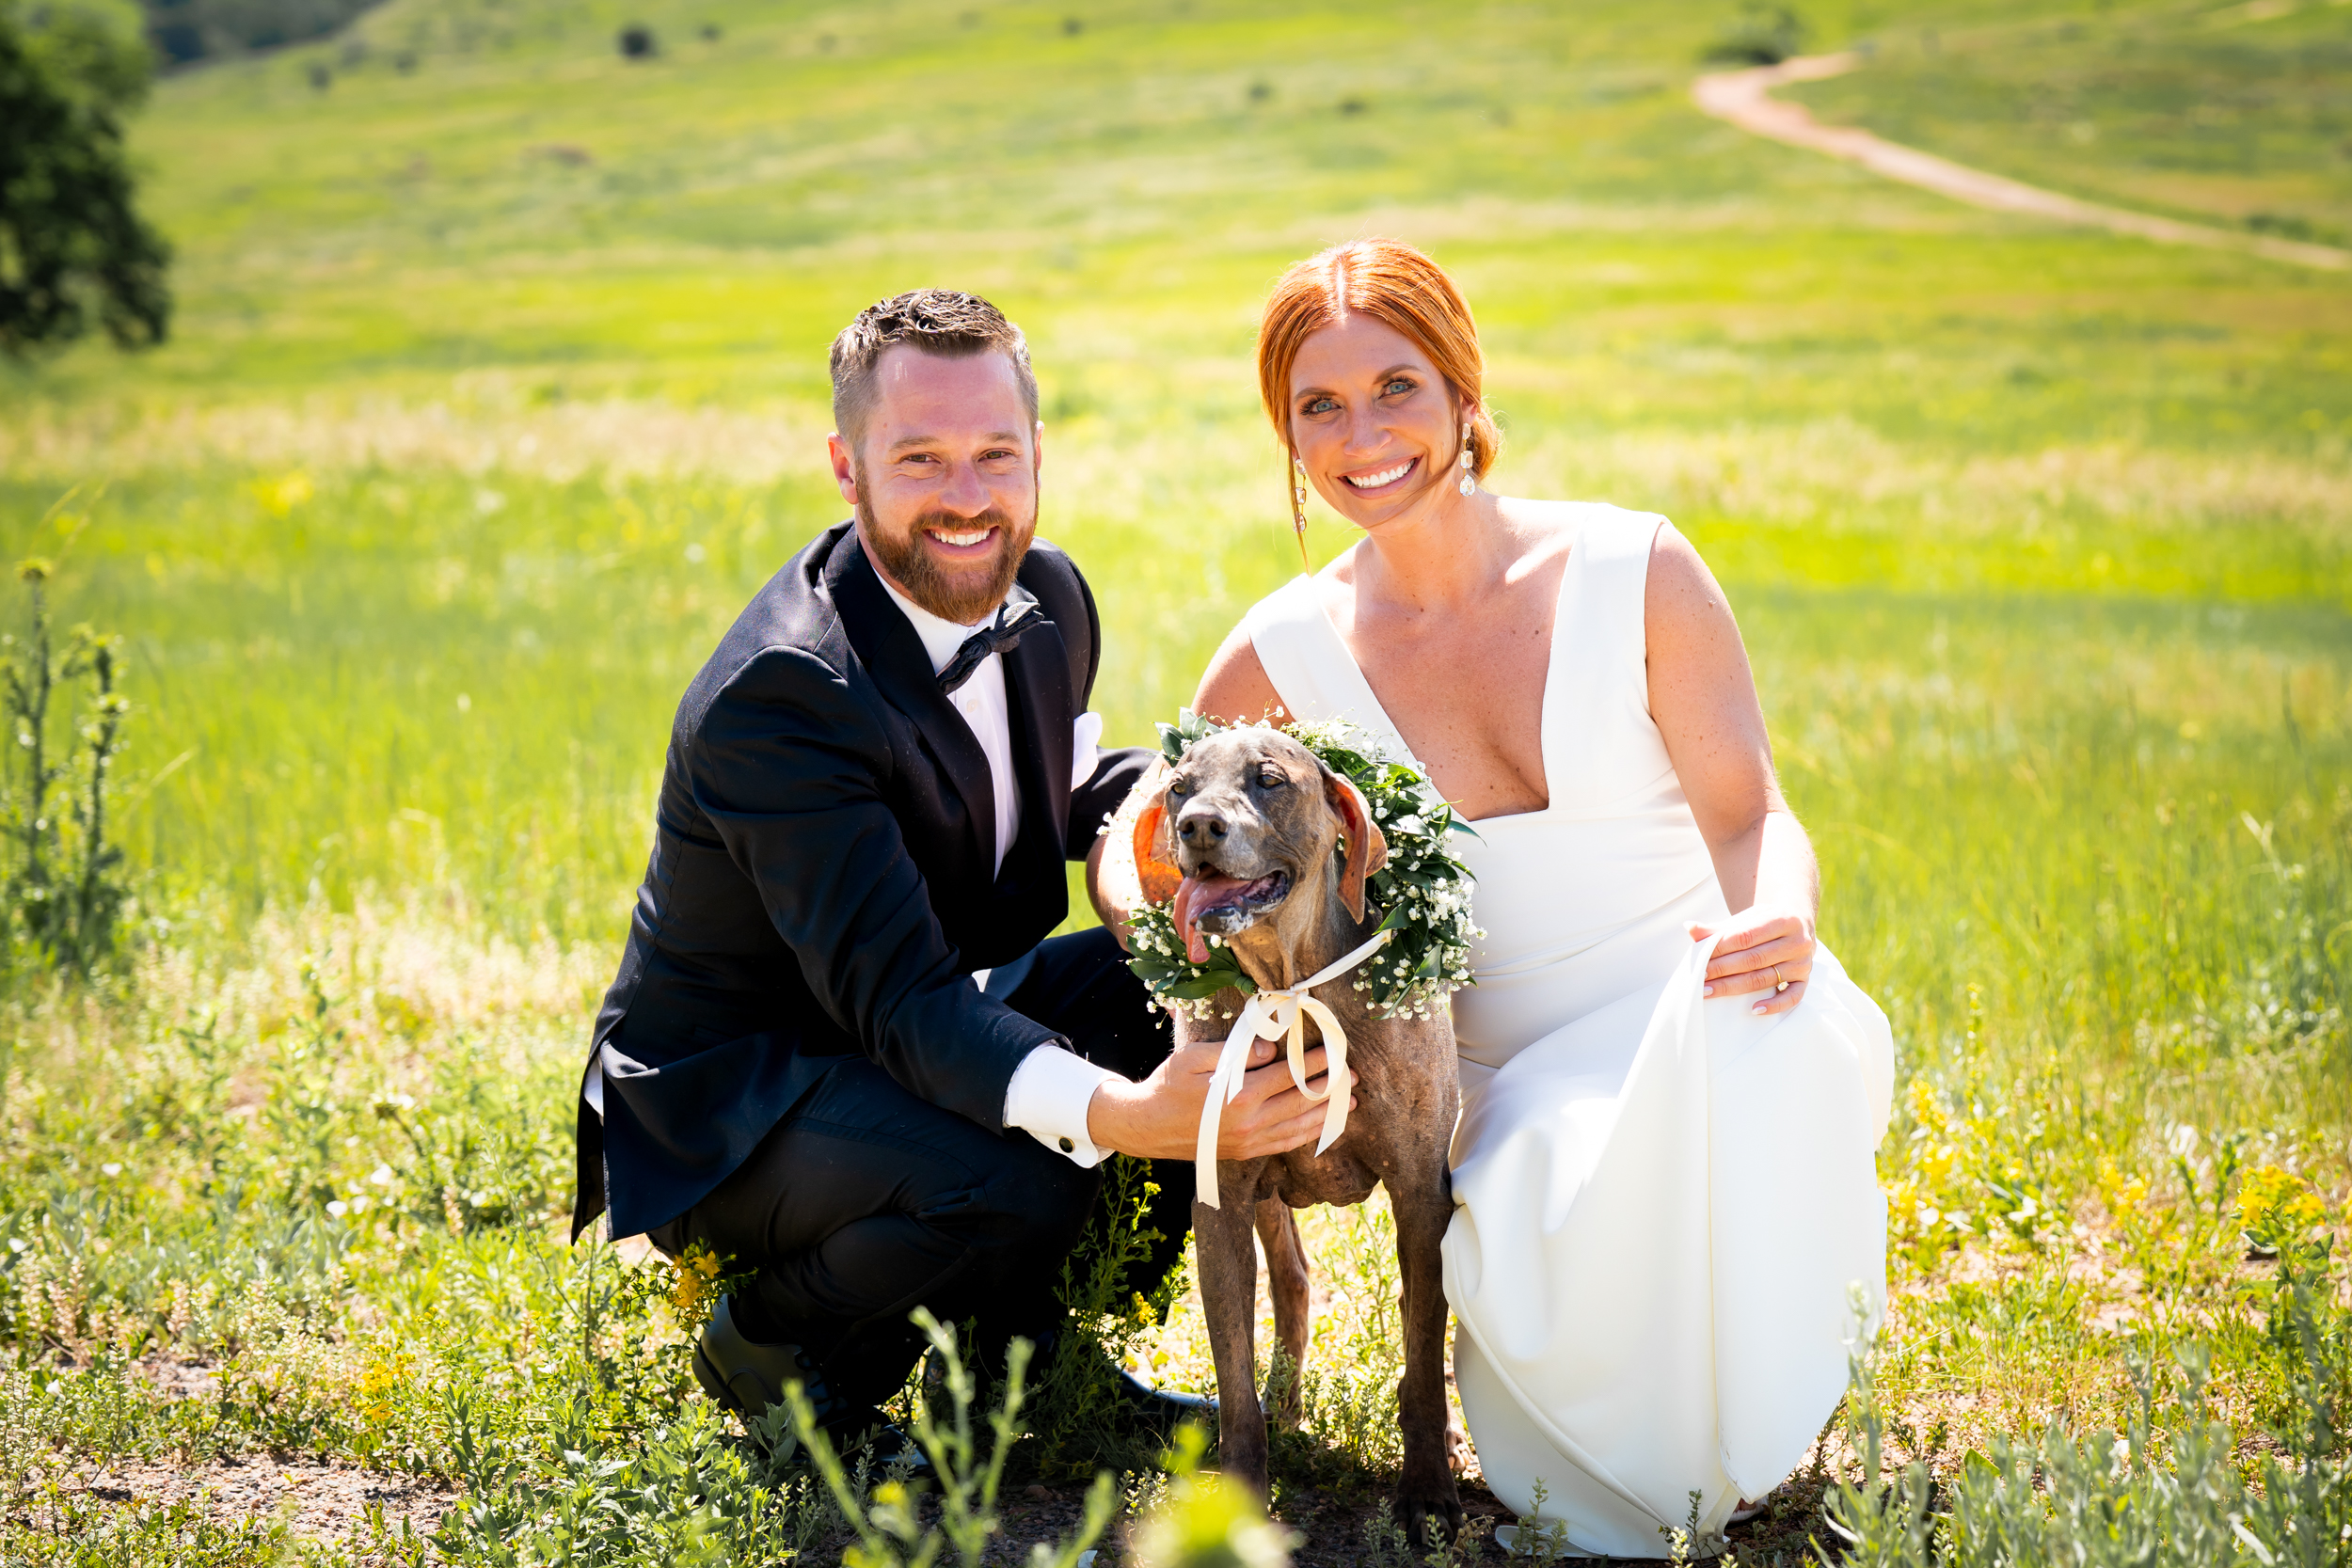 Ashley & Alex's wedding at The Manor House in June, in Littleton, Colorado. Manor House Wedding, Littleton, Denver, Colorado, Denver Wedding Photographer, Denver Wedding Photos, Denver Wedding, Dogs with bride and groom